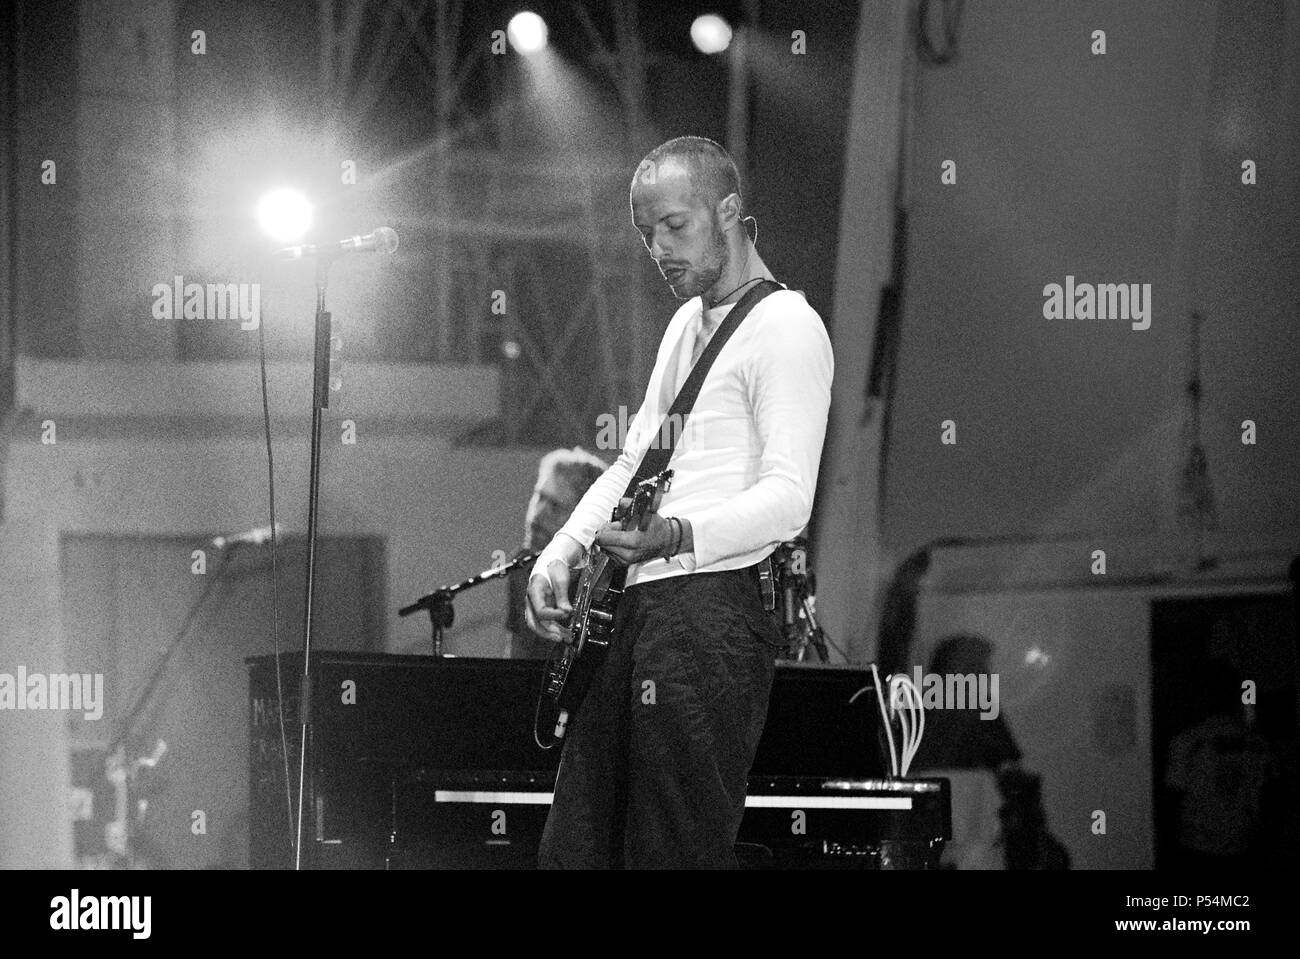 Coldplay performing at the Hollywood Bowl 31st May 2003, Los Angeles, United States of America. Stock Photo